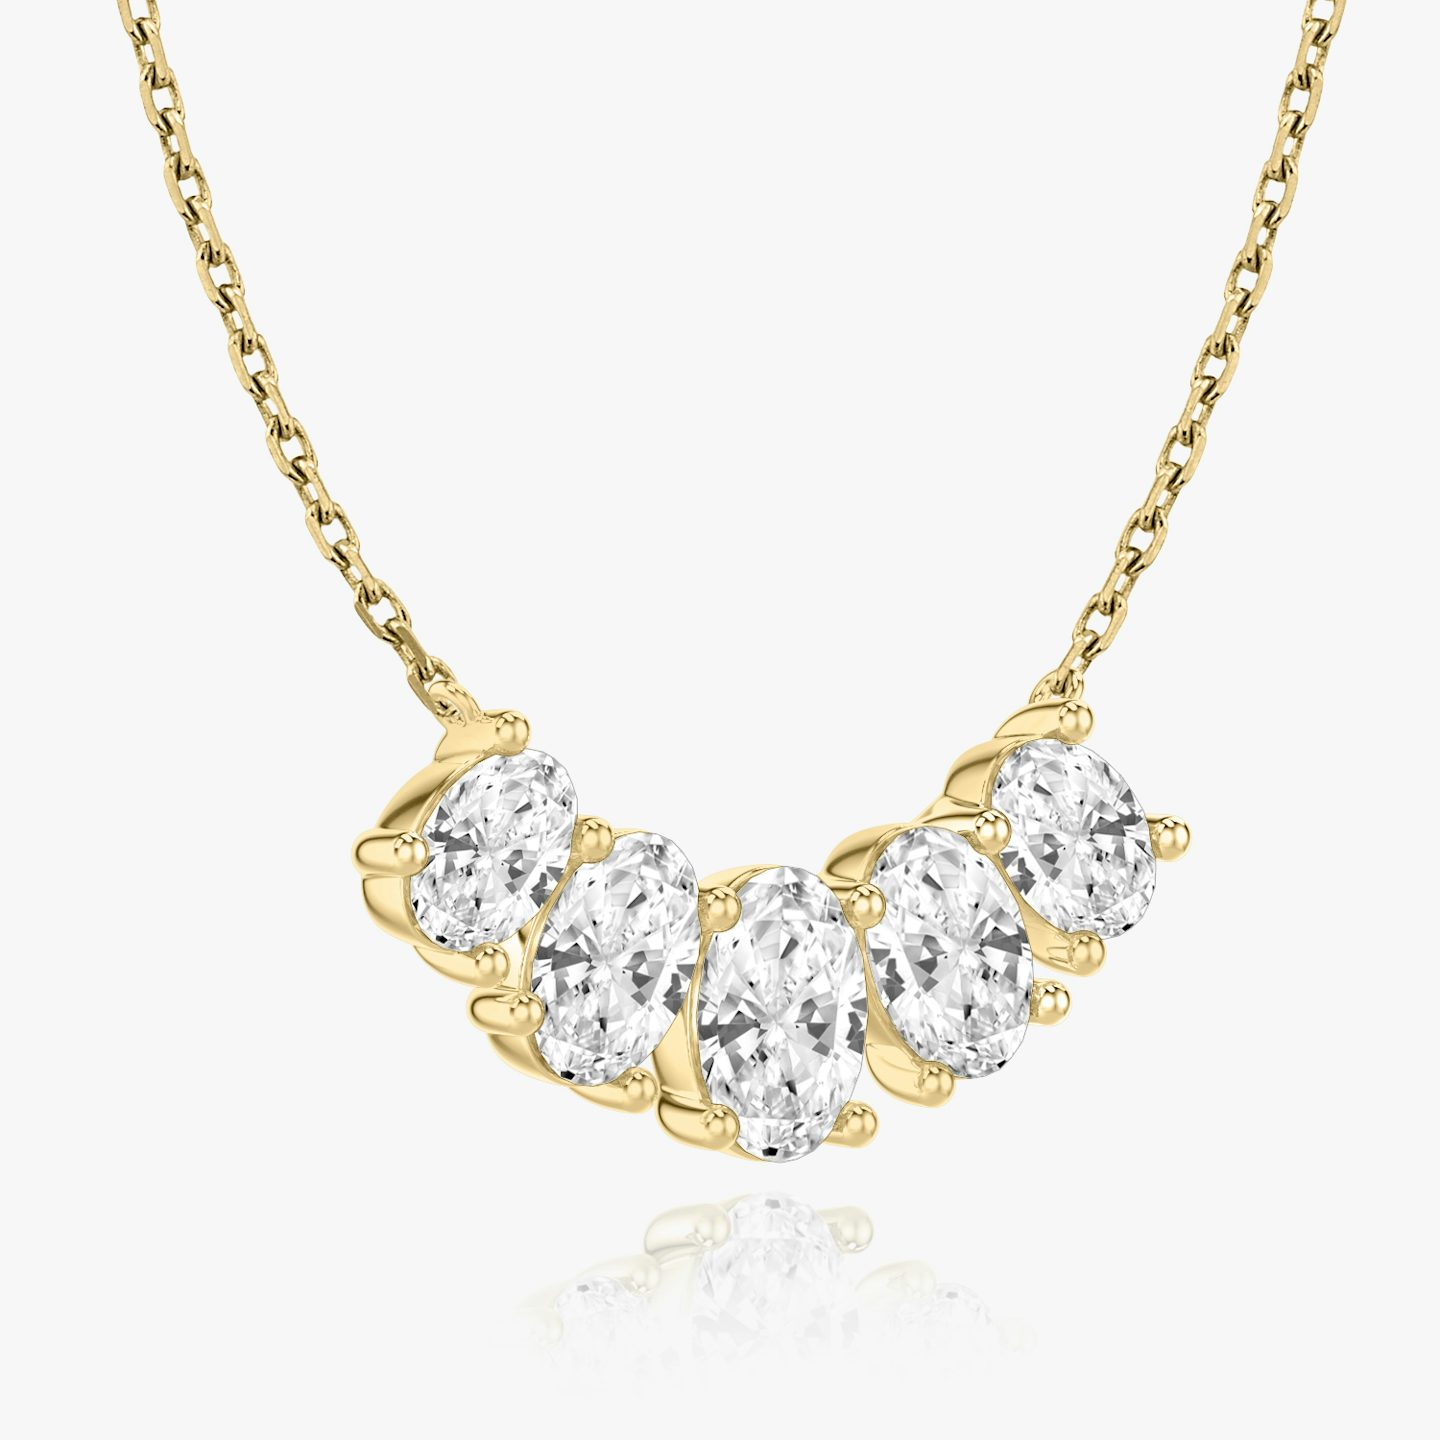 Arc Necklace | Oval | 14k | 18k Yellow Gold | Chain length: 16-18 | Diamond size: Large | Diamond count: 5